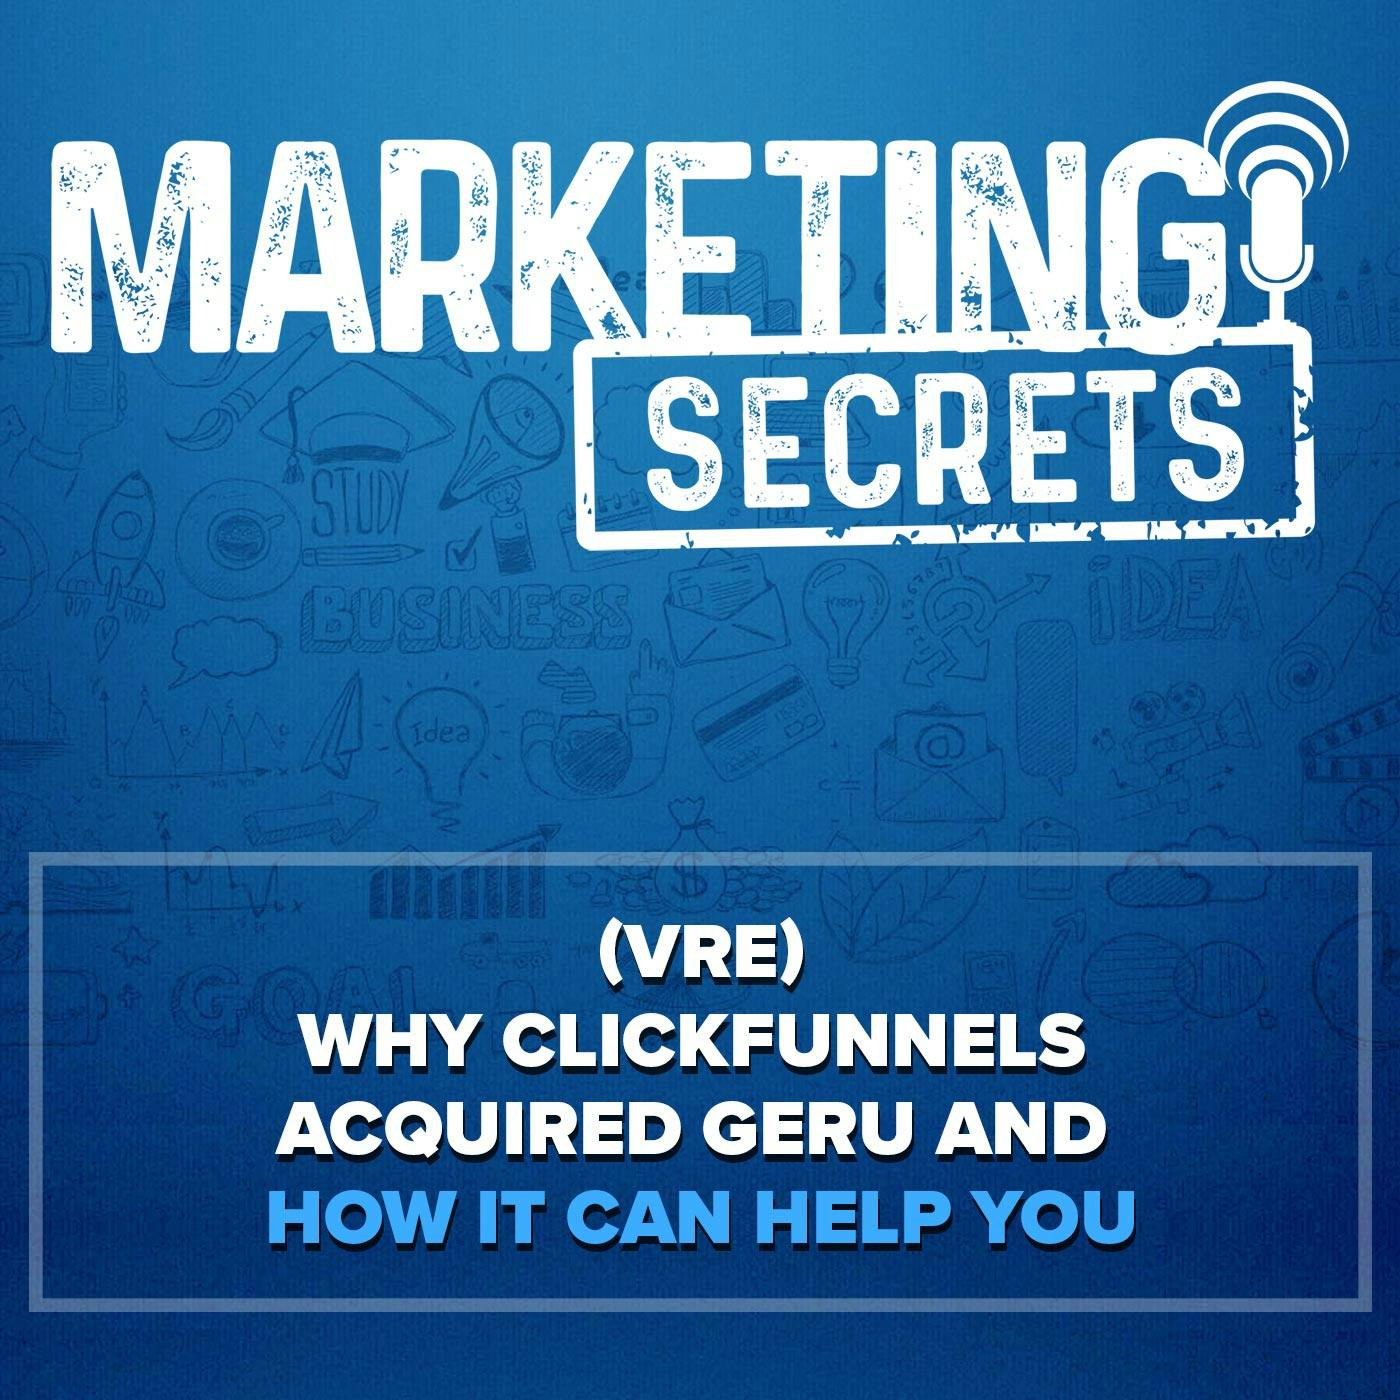 (VRE) ClickFunnels Acquired GERU.com - Find Out WHY...